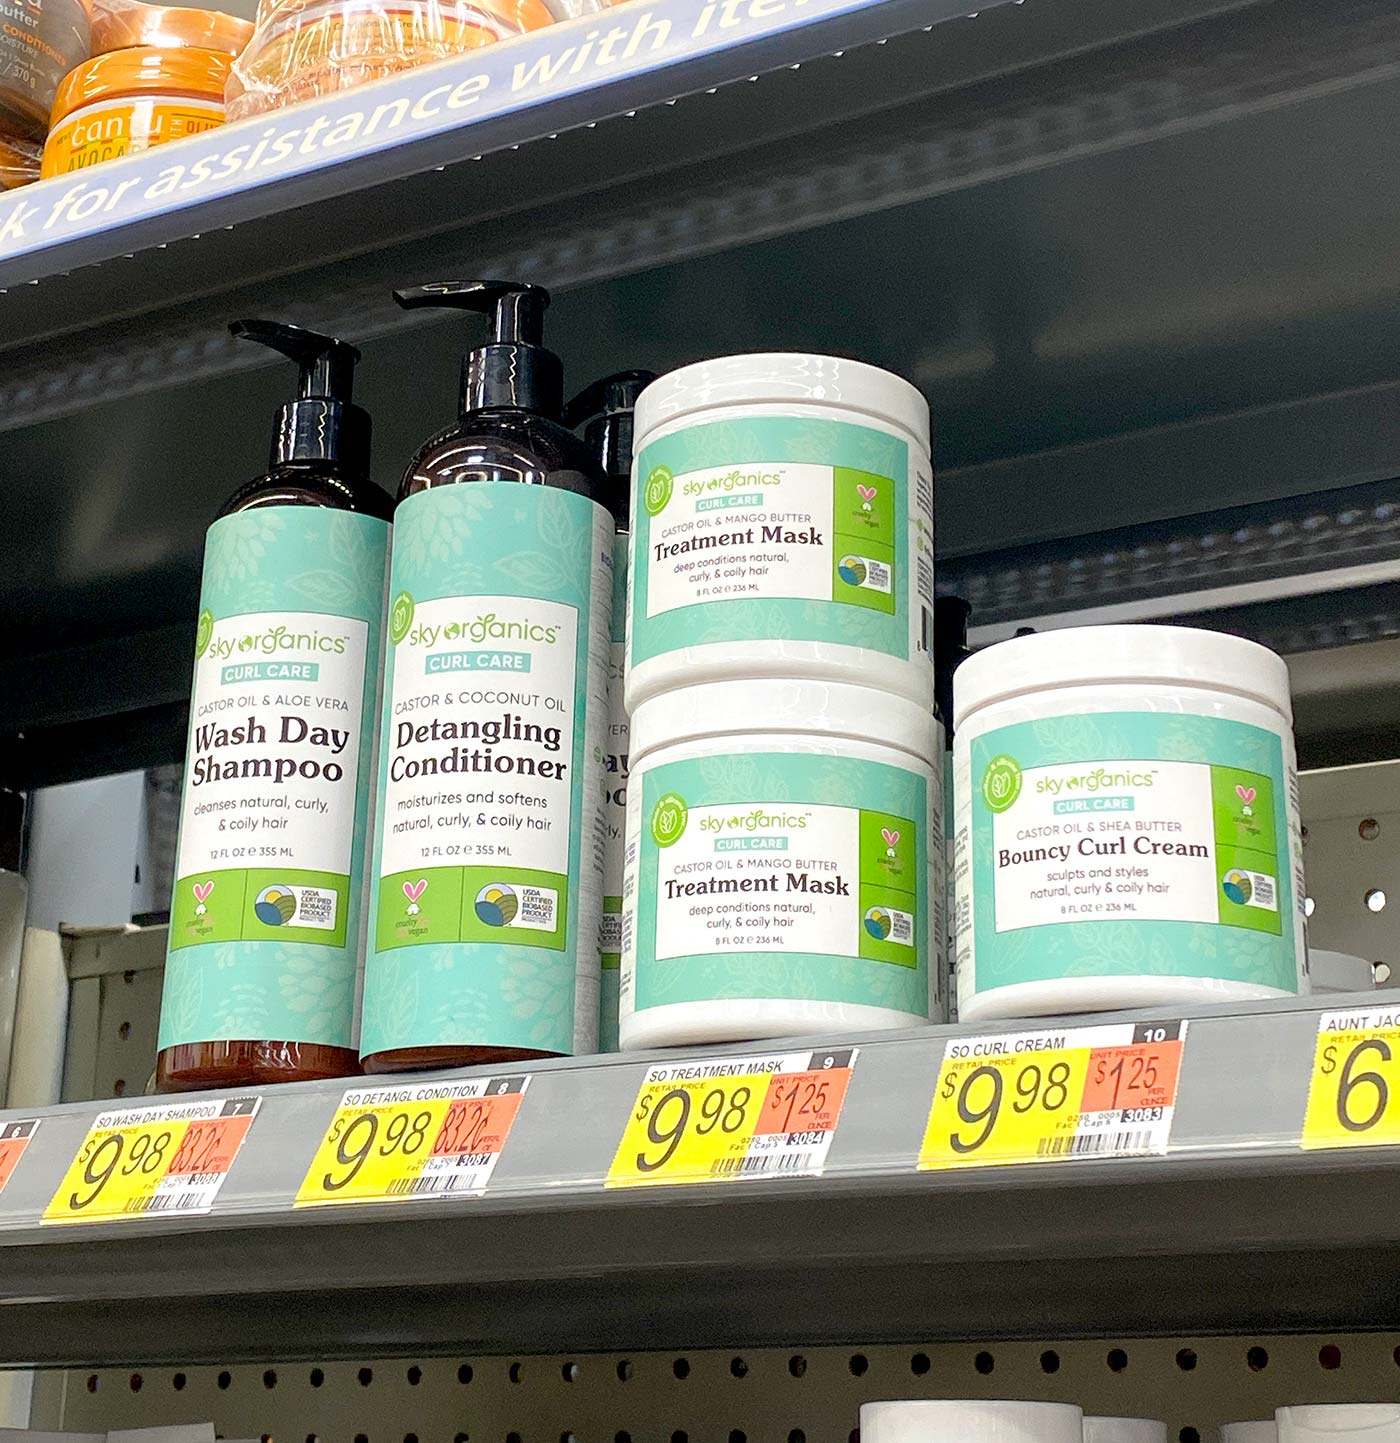 Vegan & Affordable Curly Hair Products from Sky Organics at Walmart | Slashed Beauty